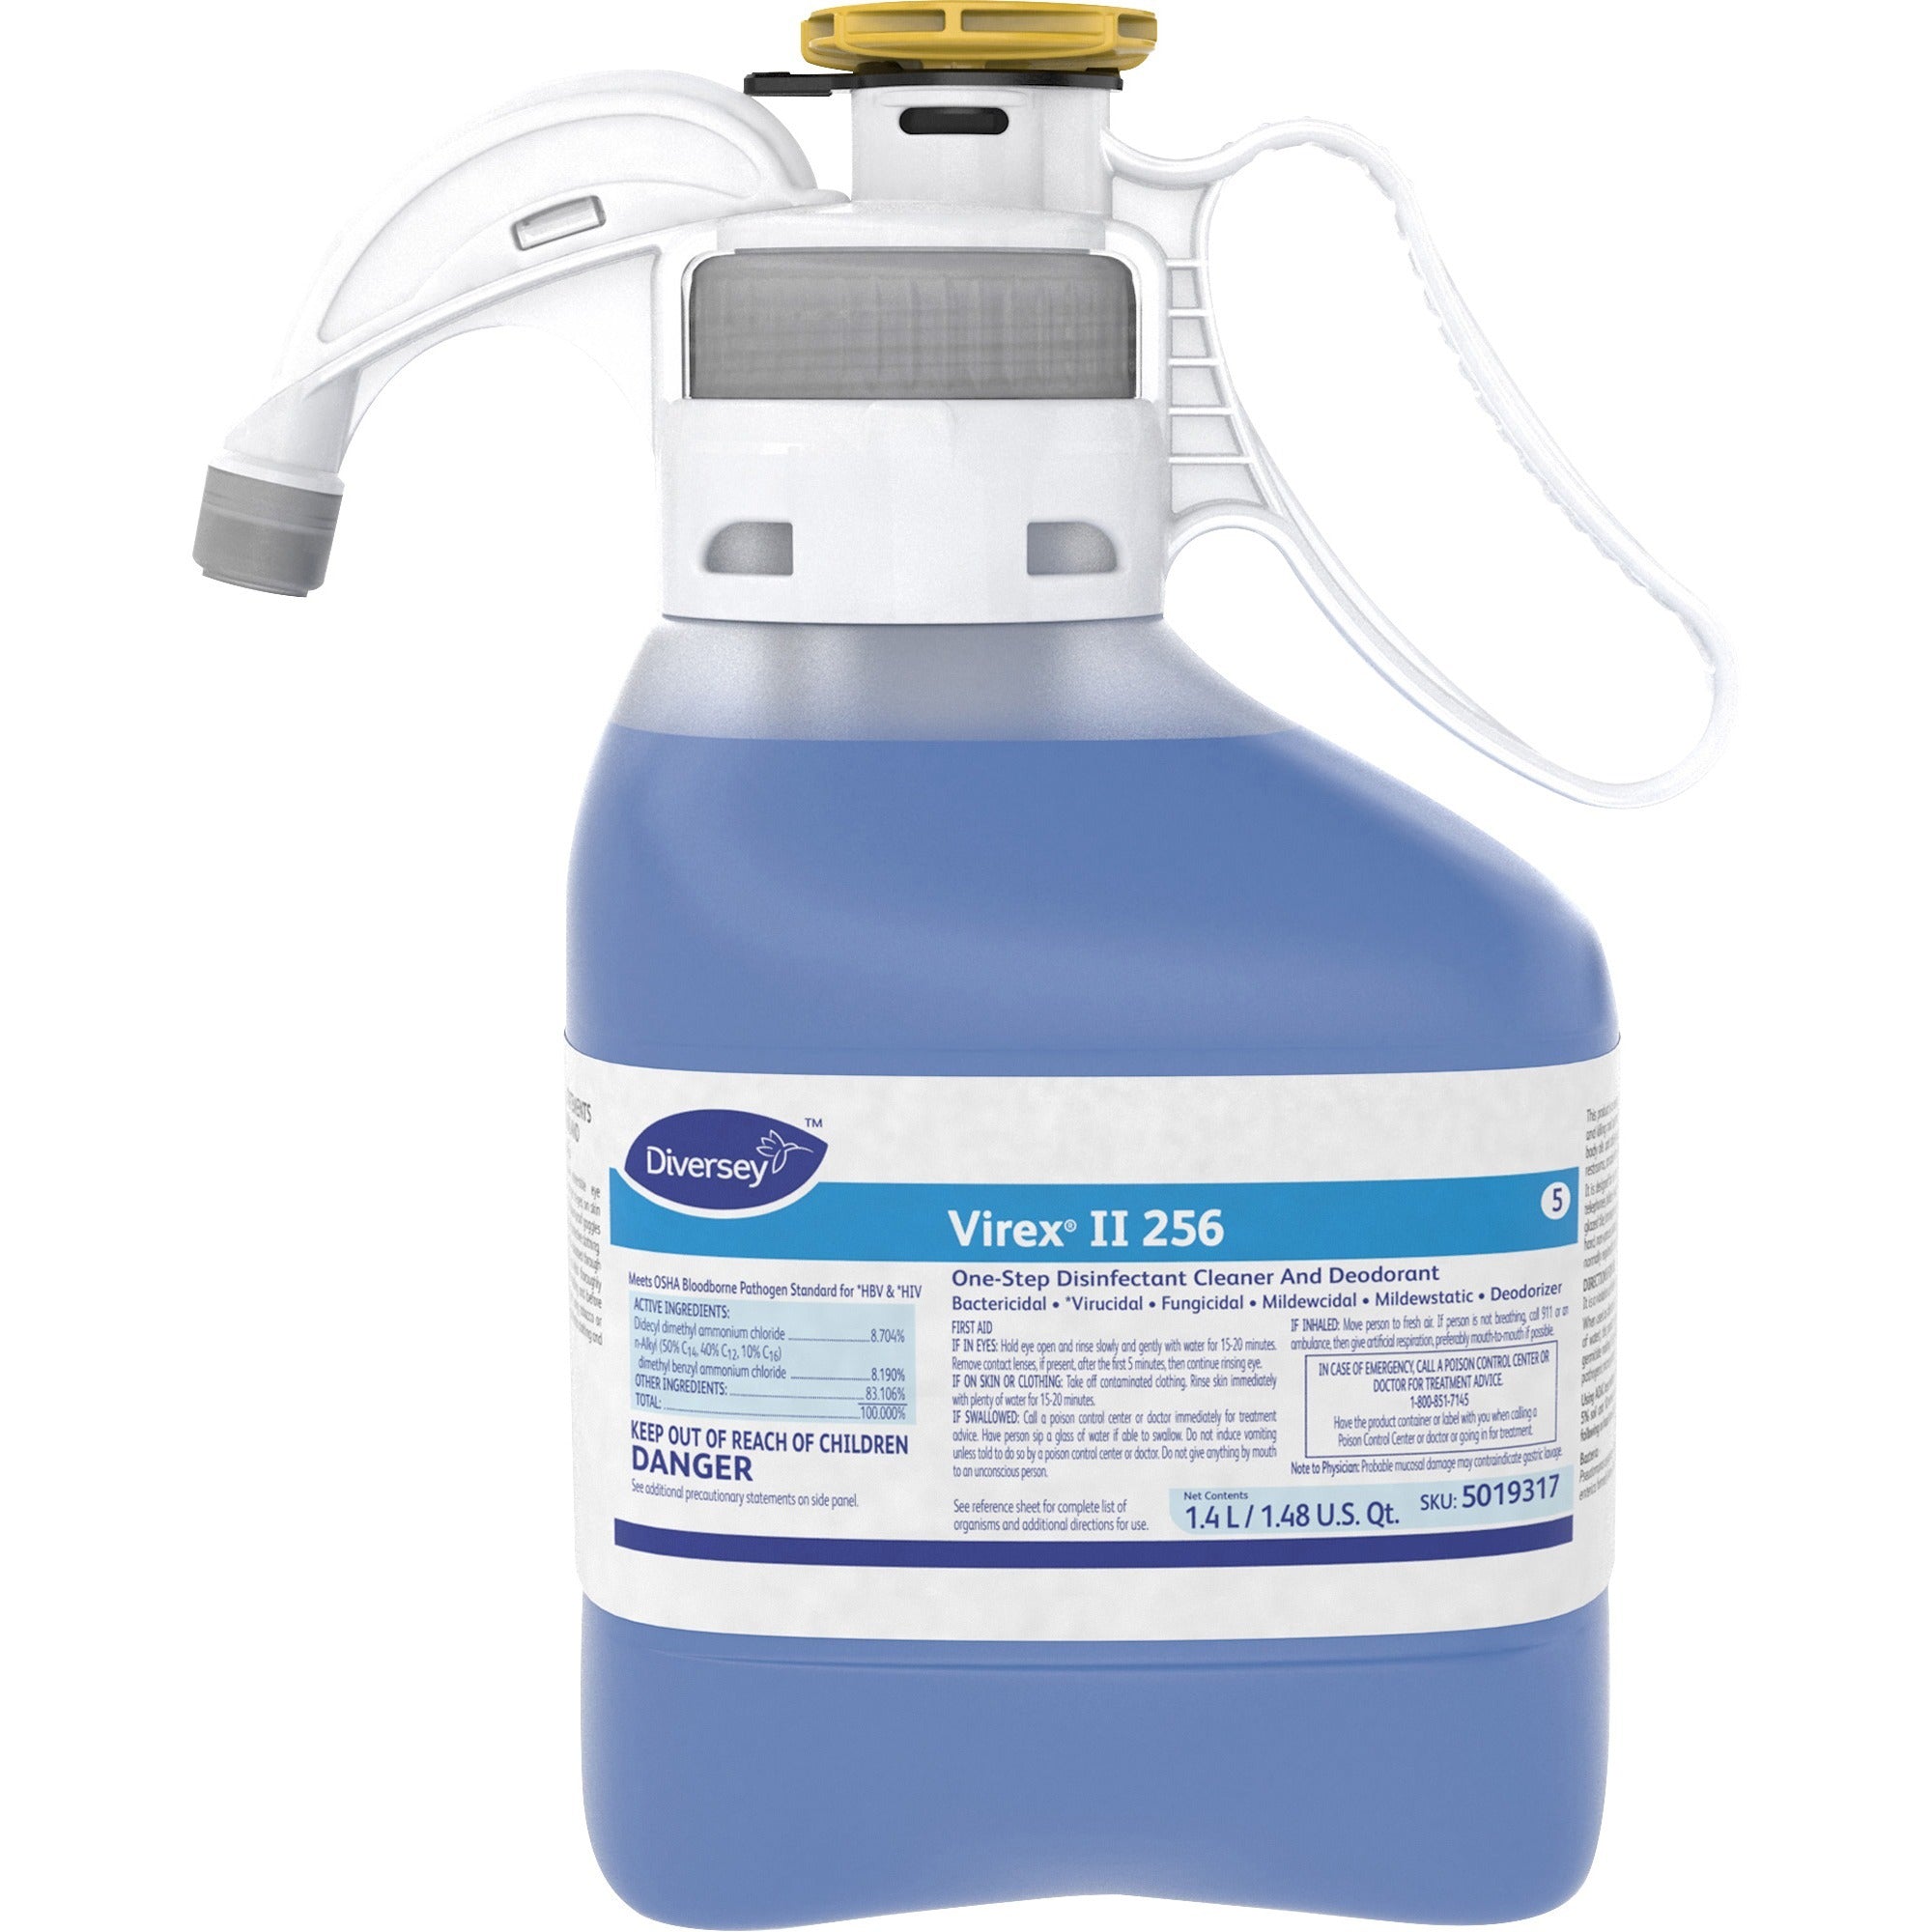 virex-ii-256-diversey-virex-ii-1-step-disinfectant-cleaner-concentrate-473-fl-oz-15-quart-minty-scent-2-carton-deodorant-disinfectant-antibacterial-rinse-free-blue_dvo5019317ct - 2